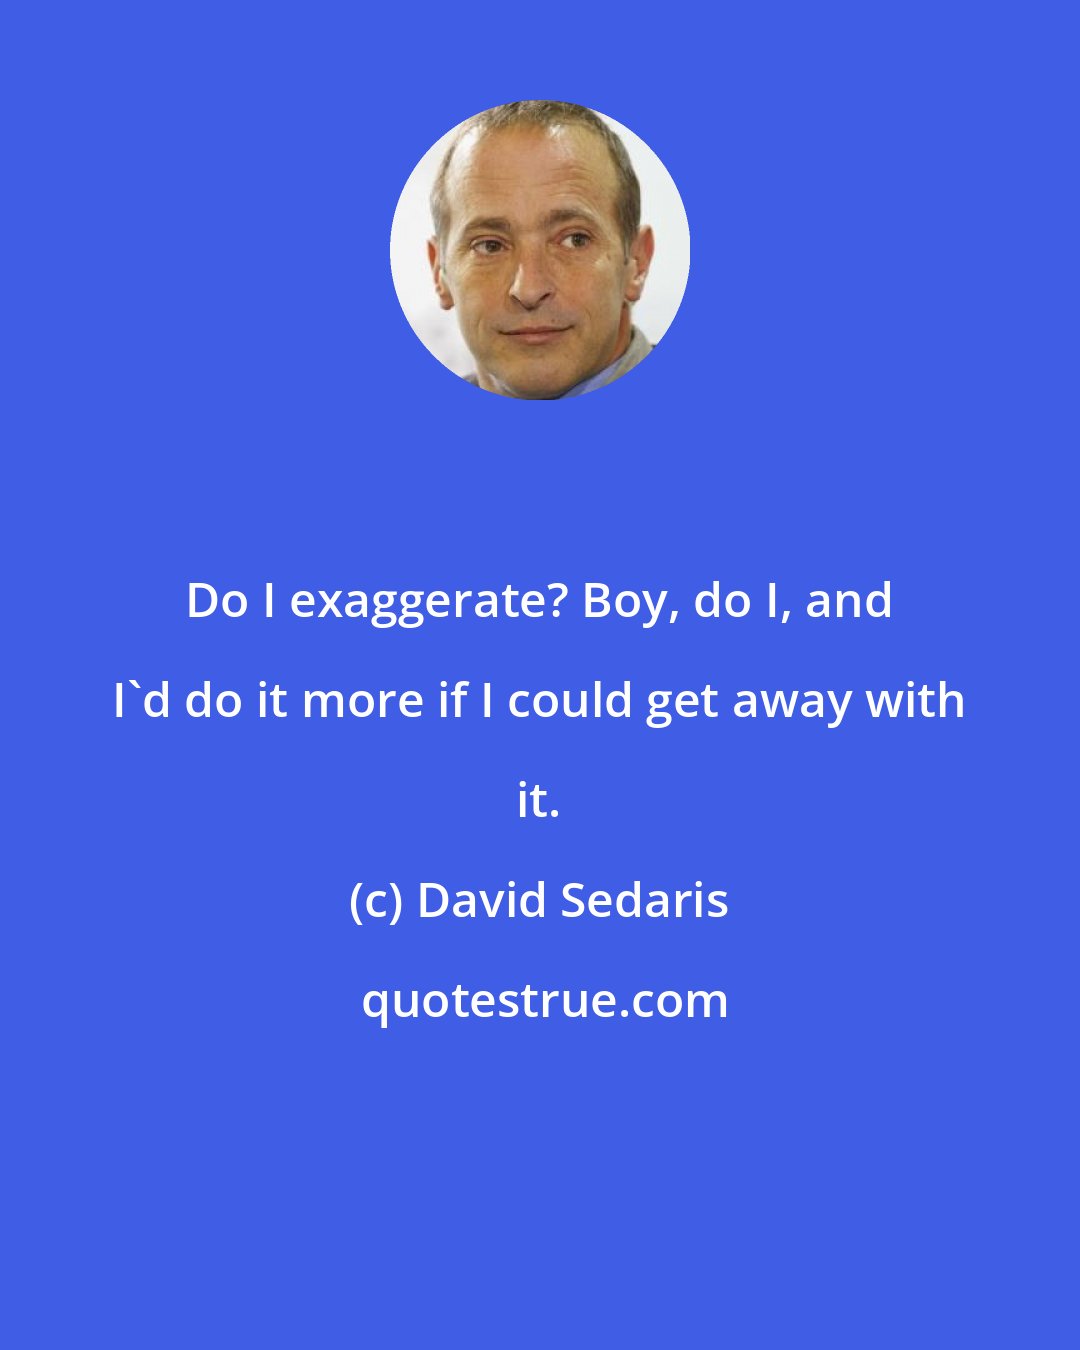 David Sedaris: Do I exaggerate? Boy, do I, and I'd do it more if I could get away with it.